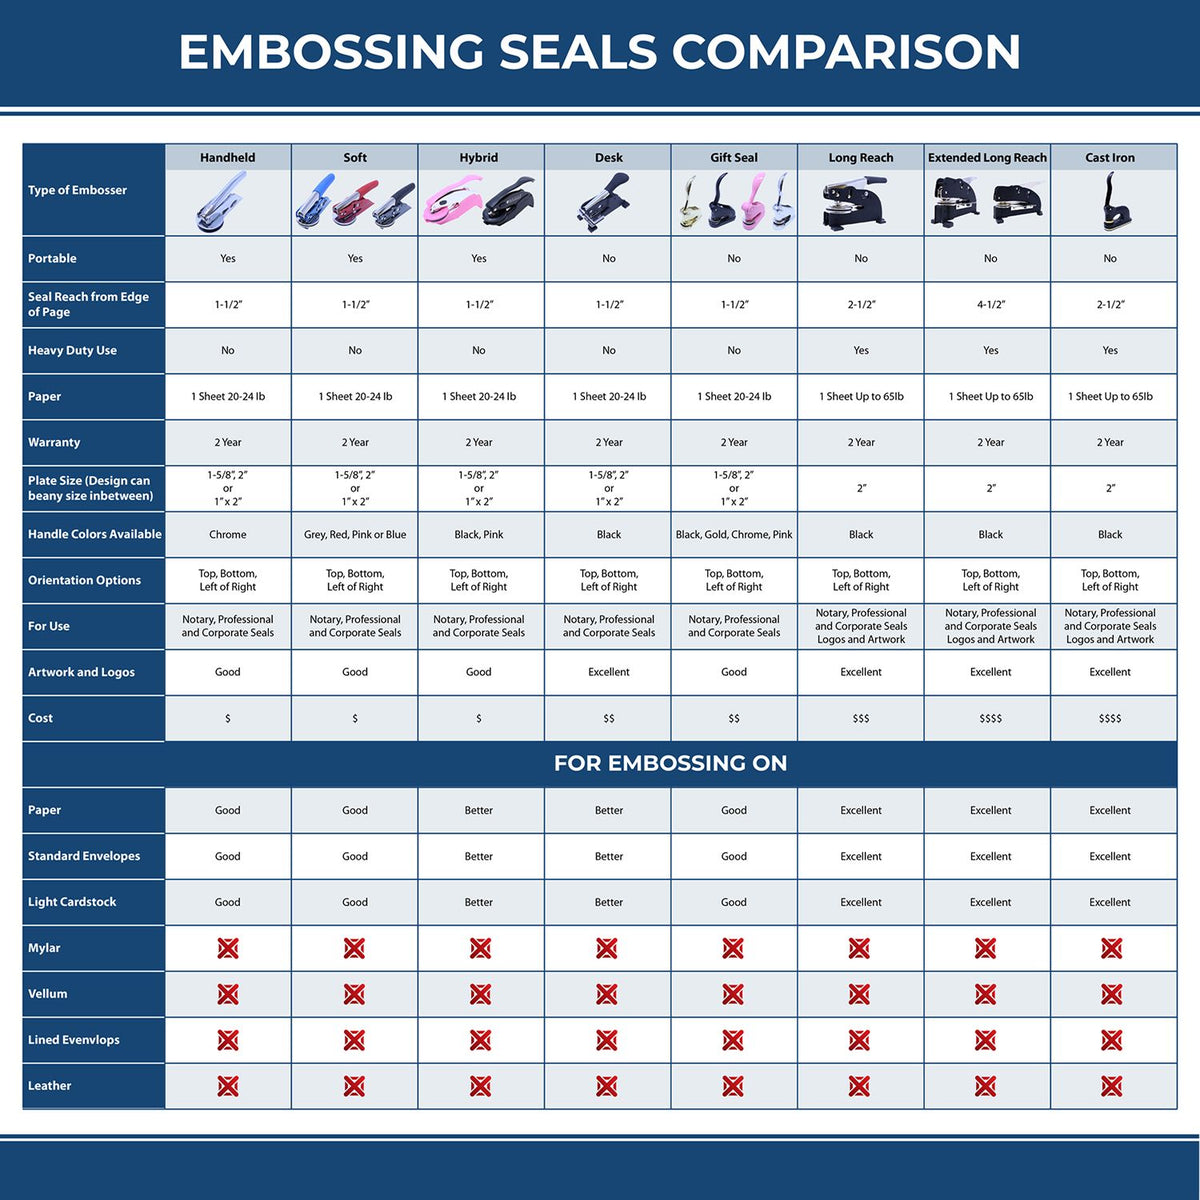 A comparison chart for the different types of mount models available for the Handheld New Mexico Professional Engineer Embosser.